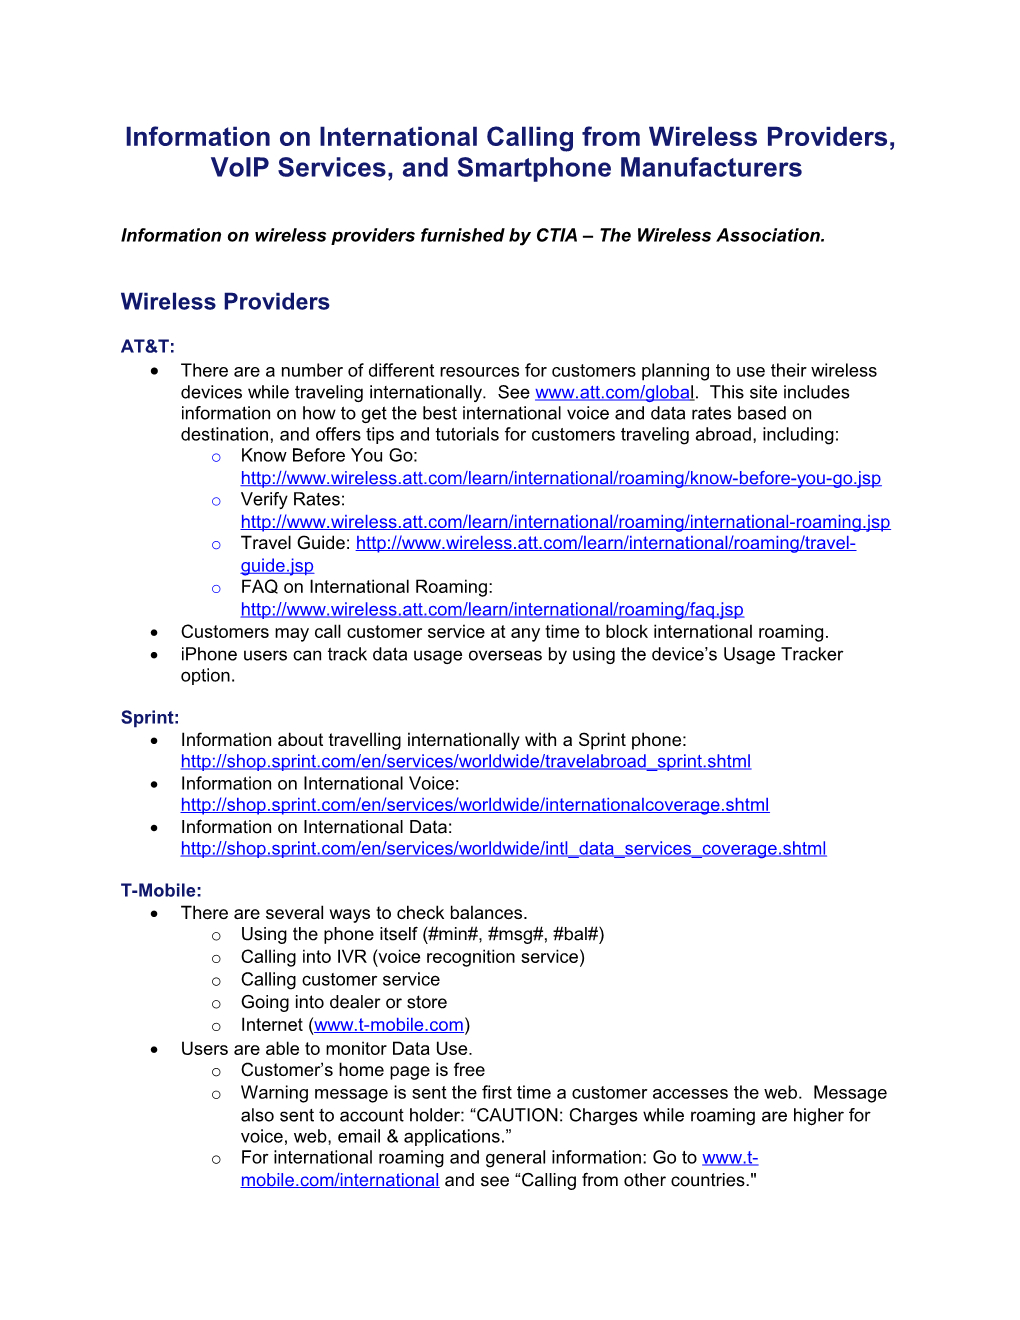 Information on International Calling from Wireless Providers, Voip Services, and Smartphone